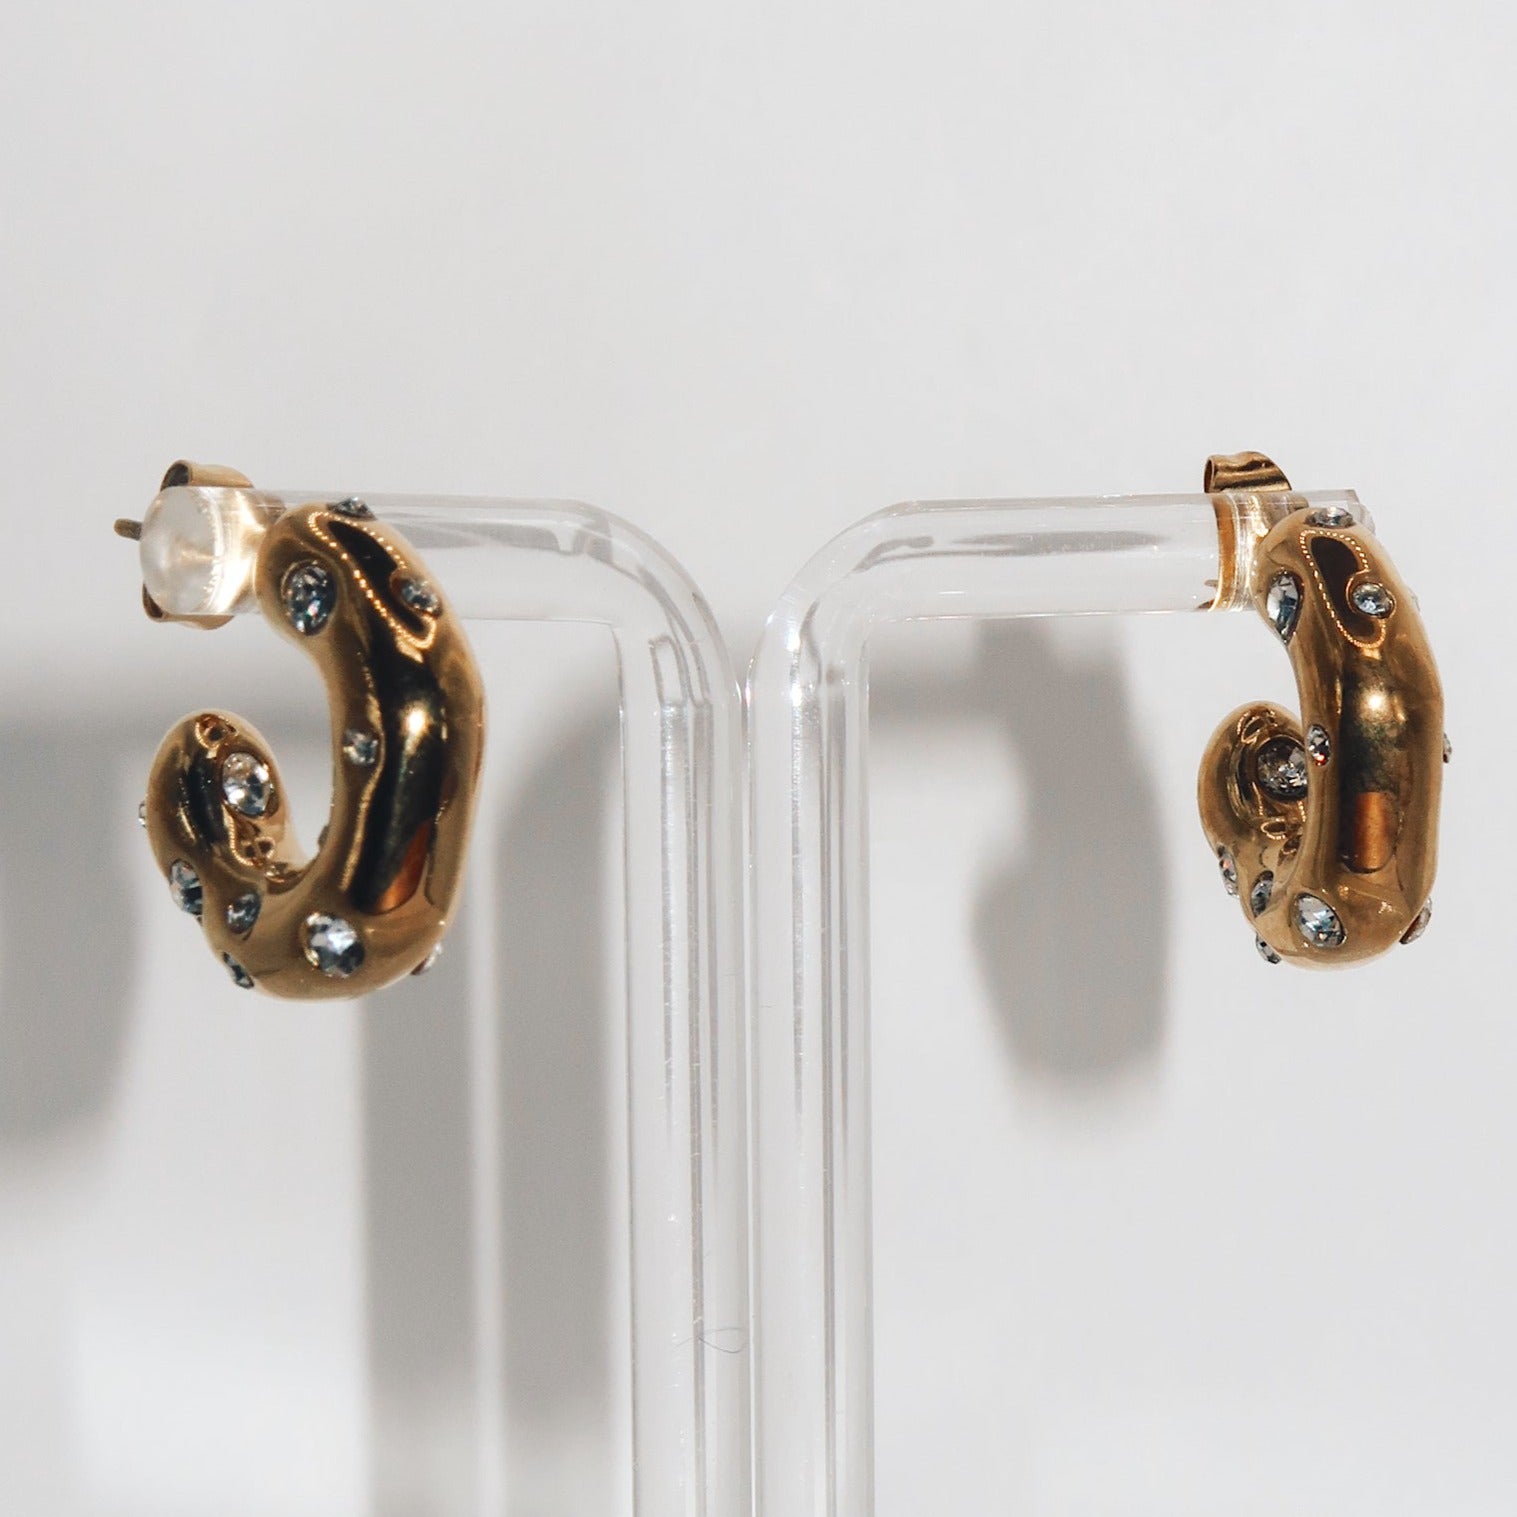 GIN - 18k PVD Gold Plated Small Chunky Earrings with CZ Stones Detailing - Mixed Metals